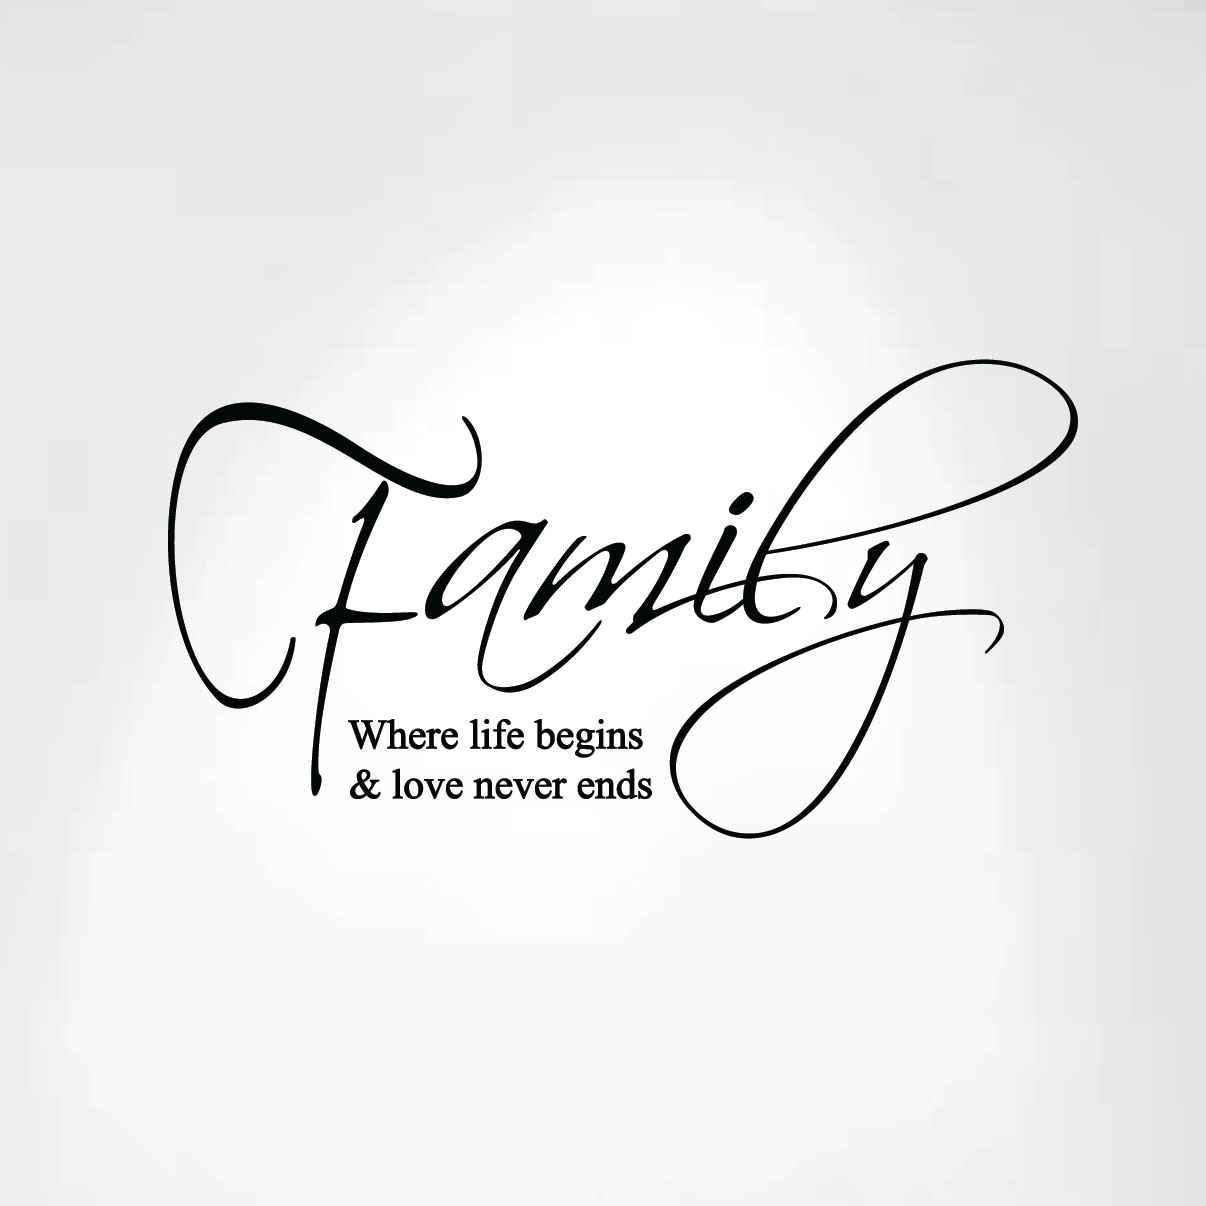 1258-family-where-life-begins-and-love-never-ends-close.jpg